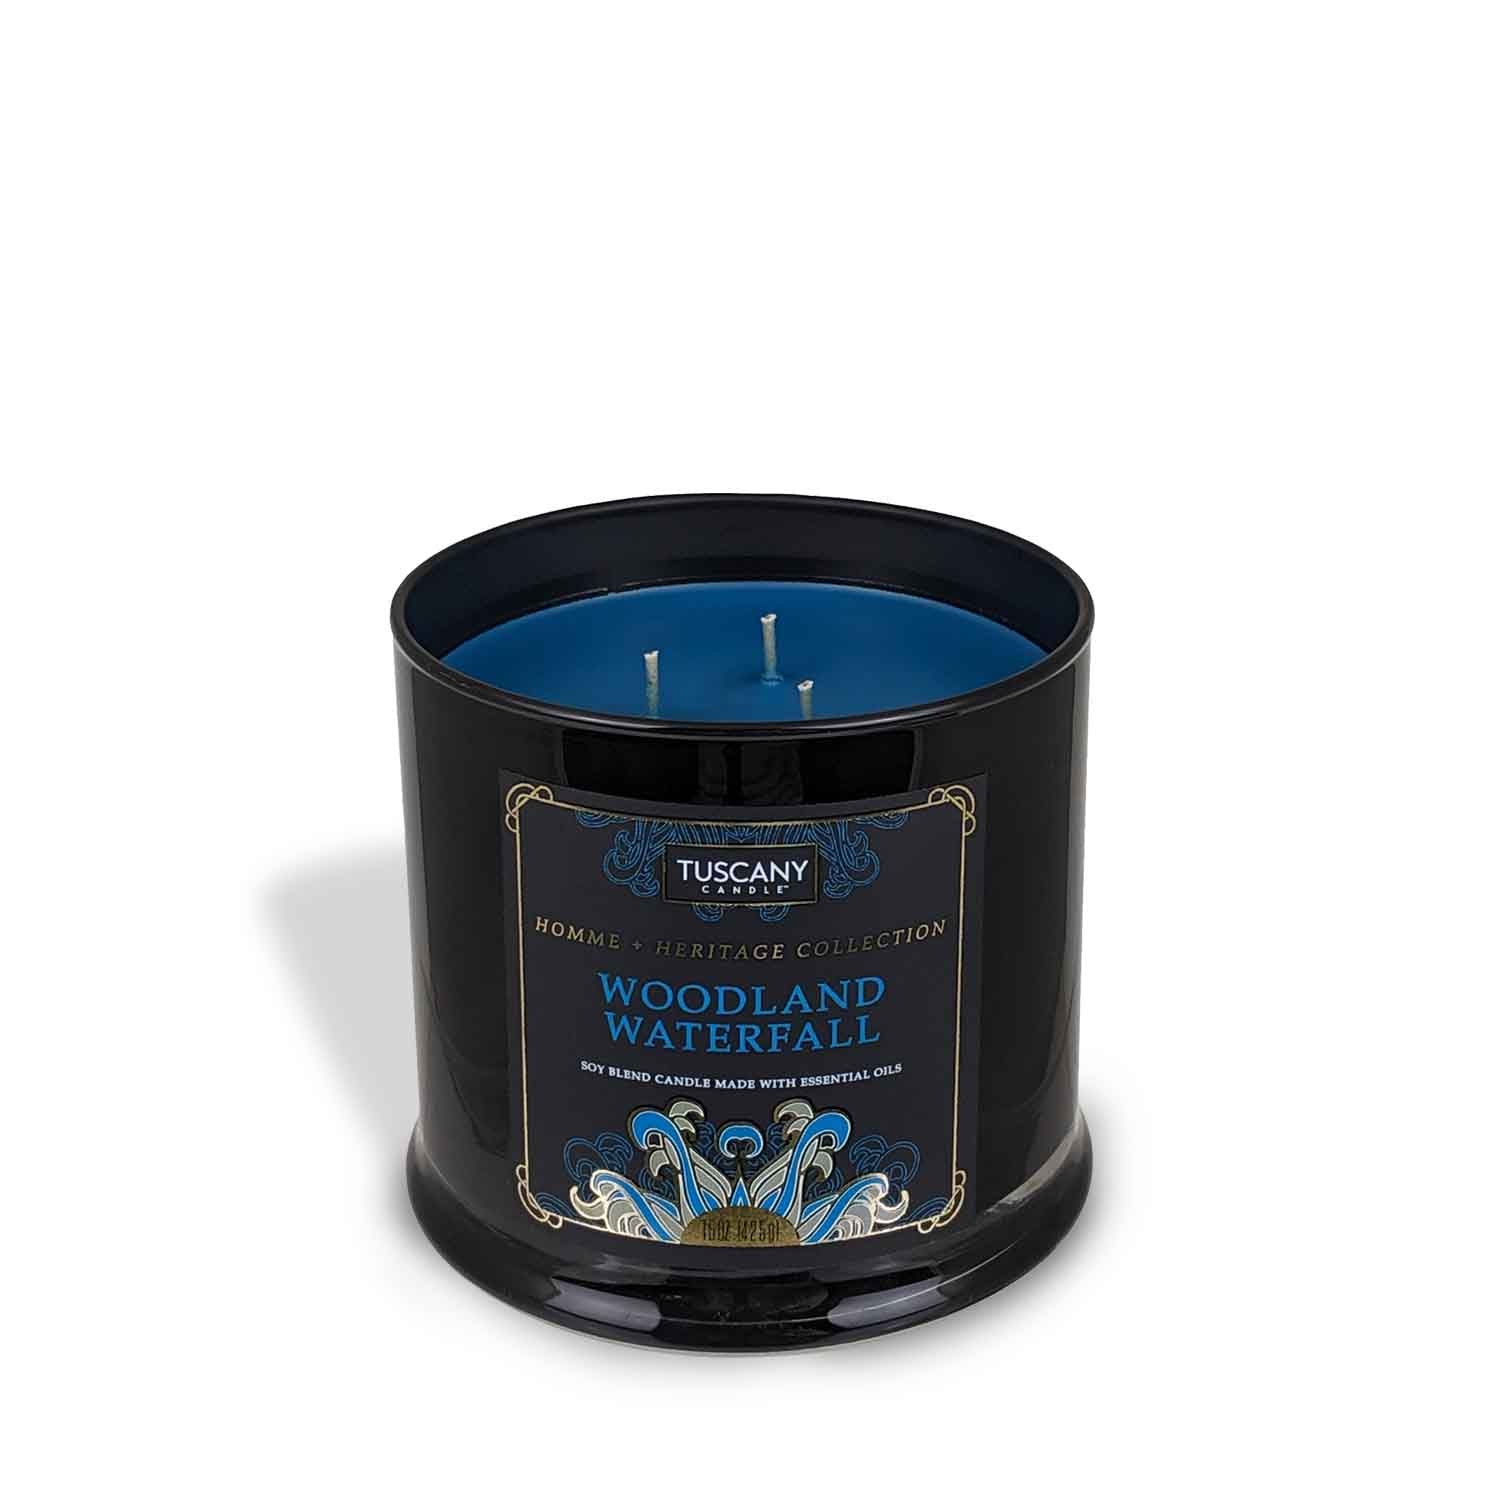 Tuscany Candle's Woodland Waterfall Scented Jar Candle (15 oz) – Homme + Heritage Collection in a black tin with a blue lid, creating a serene ambiance.